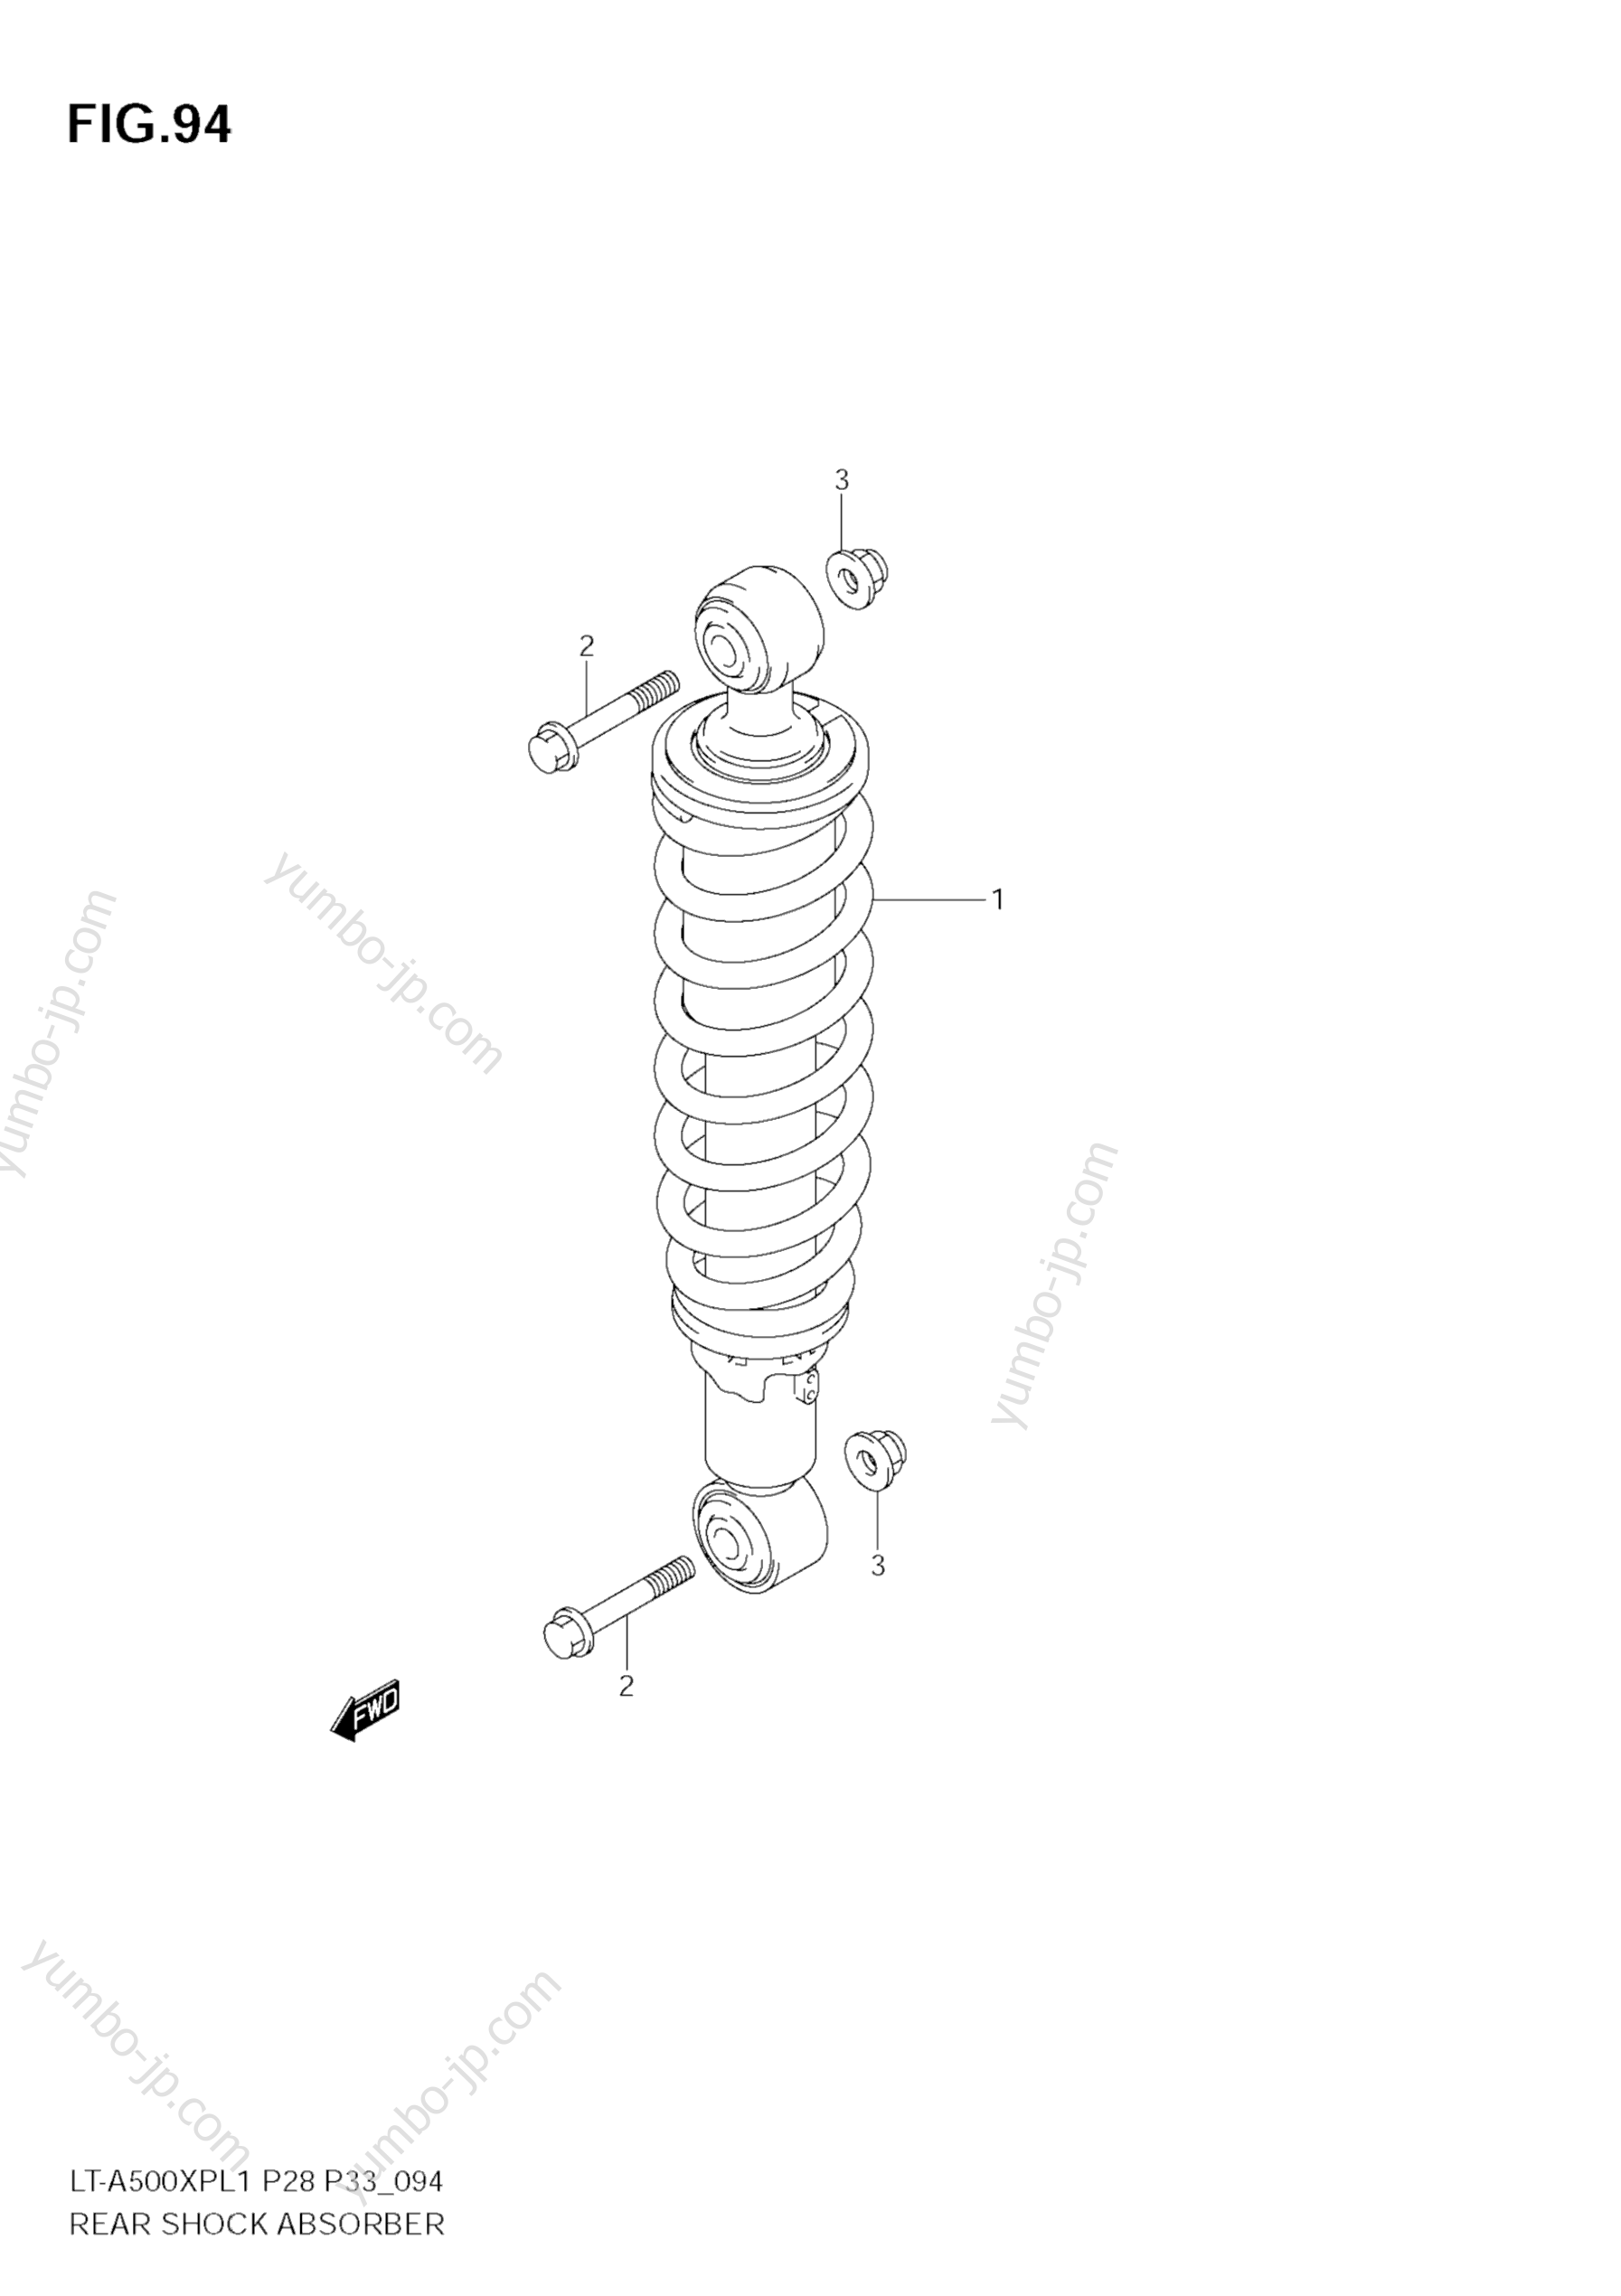 REAR SHOCK ABSORBER for ATVs SUZUKI KingQuad (LT-A500XPZ) 2011 year